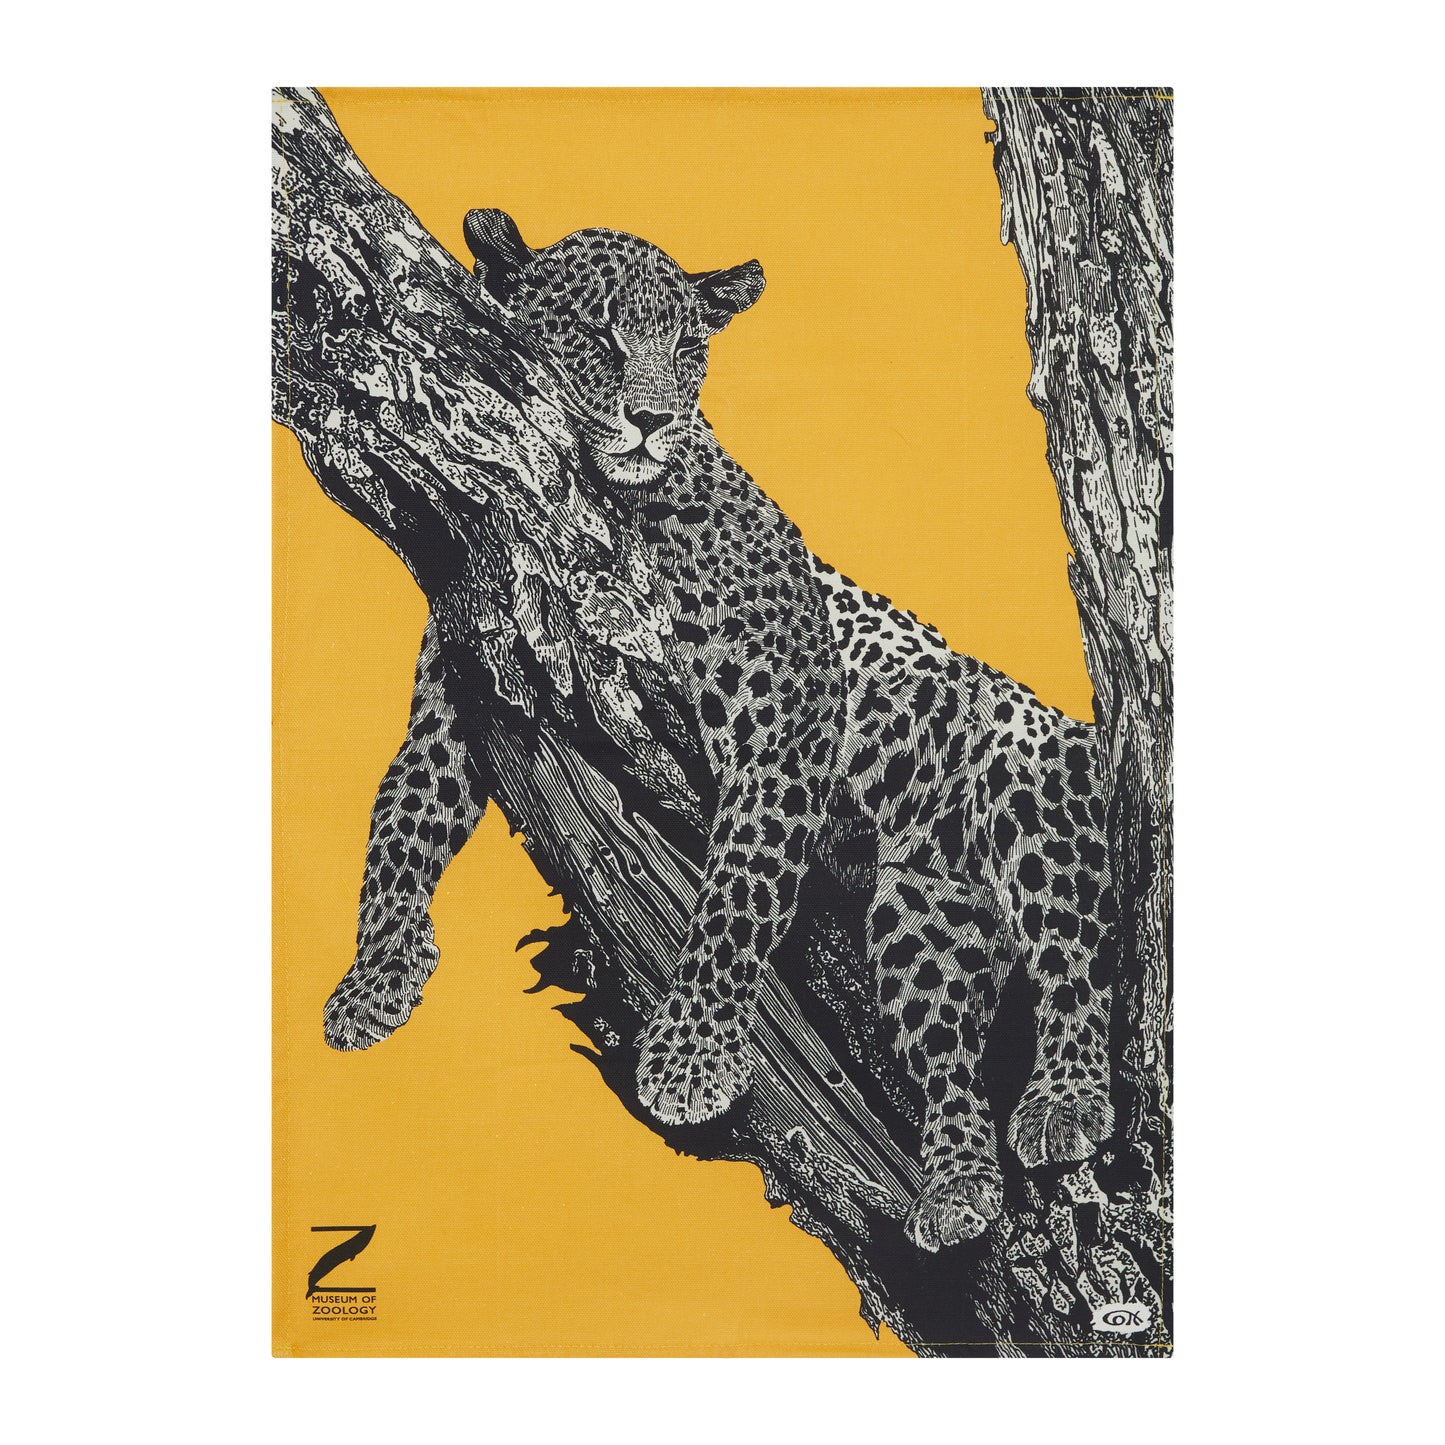 Tea towel = sleeping leopard illustration in black and white, with mustard yellow background. Museum of Zoology logo in black, bottom left.